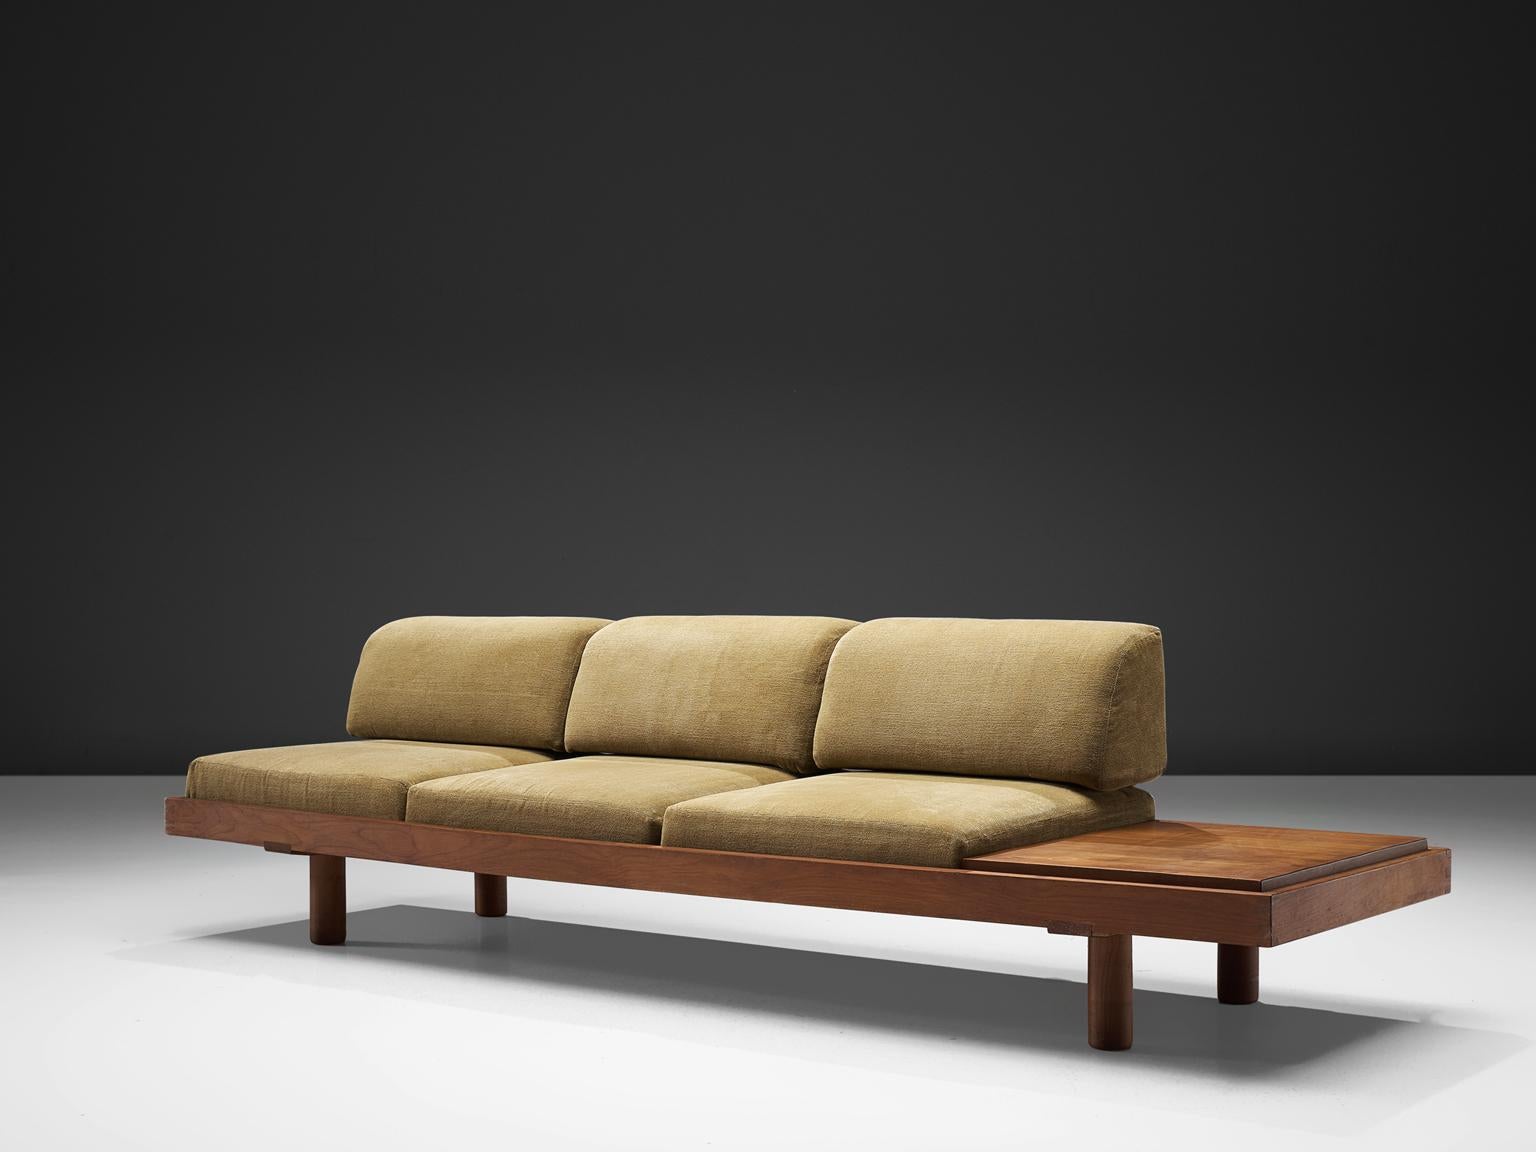 Pierre Chapo, bench L 09 H, elm and beige to green fabric, France, design 1960s. 

The piece is a true classic by Chapo in the way it is proportioned. The thick, cylindrical legs combined with the top that holds an asymetrical aesthetic with a